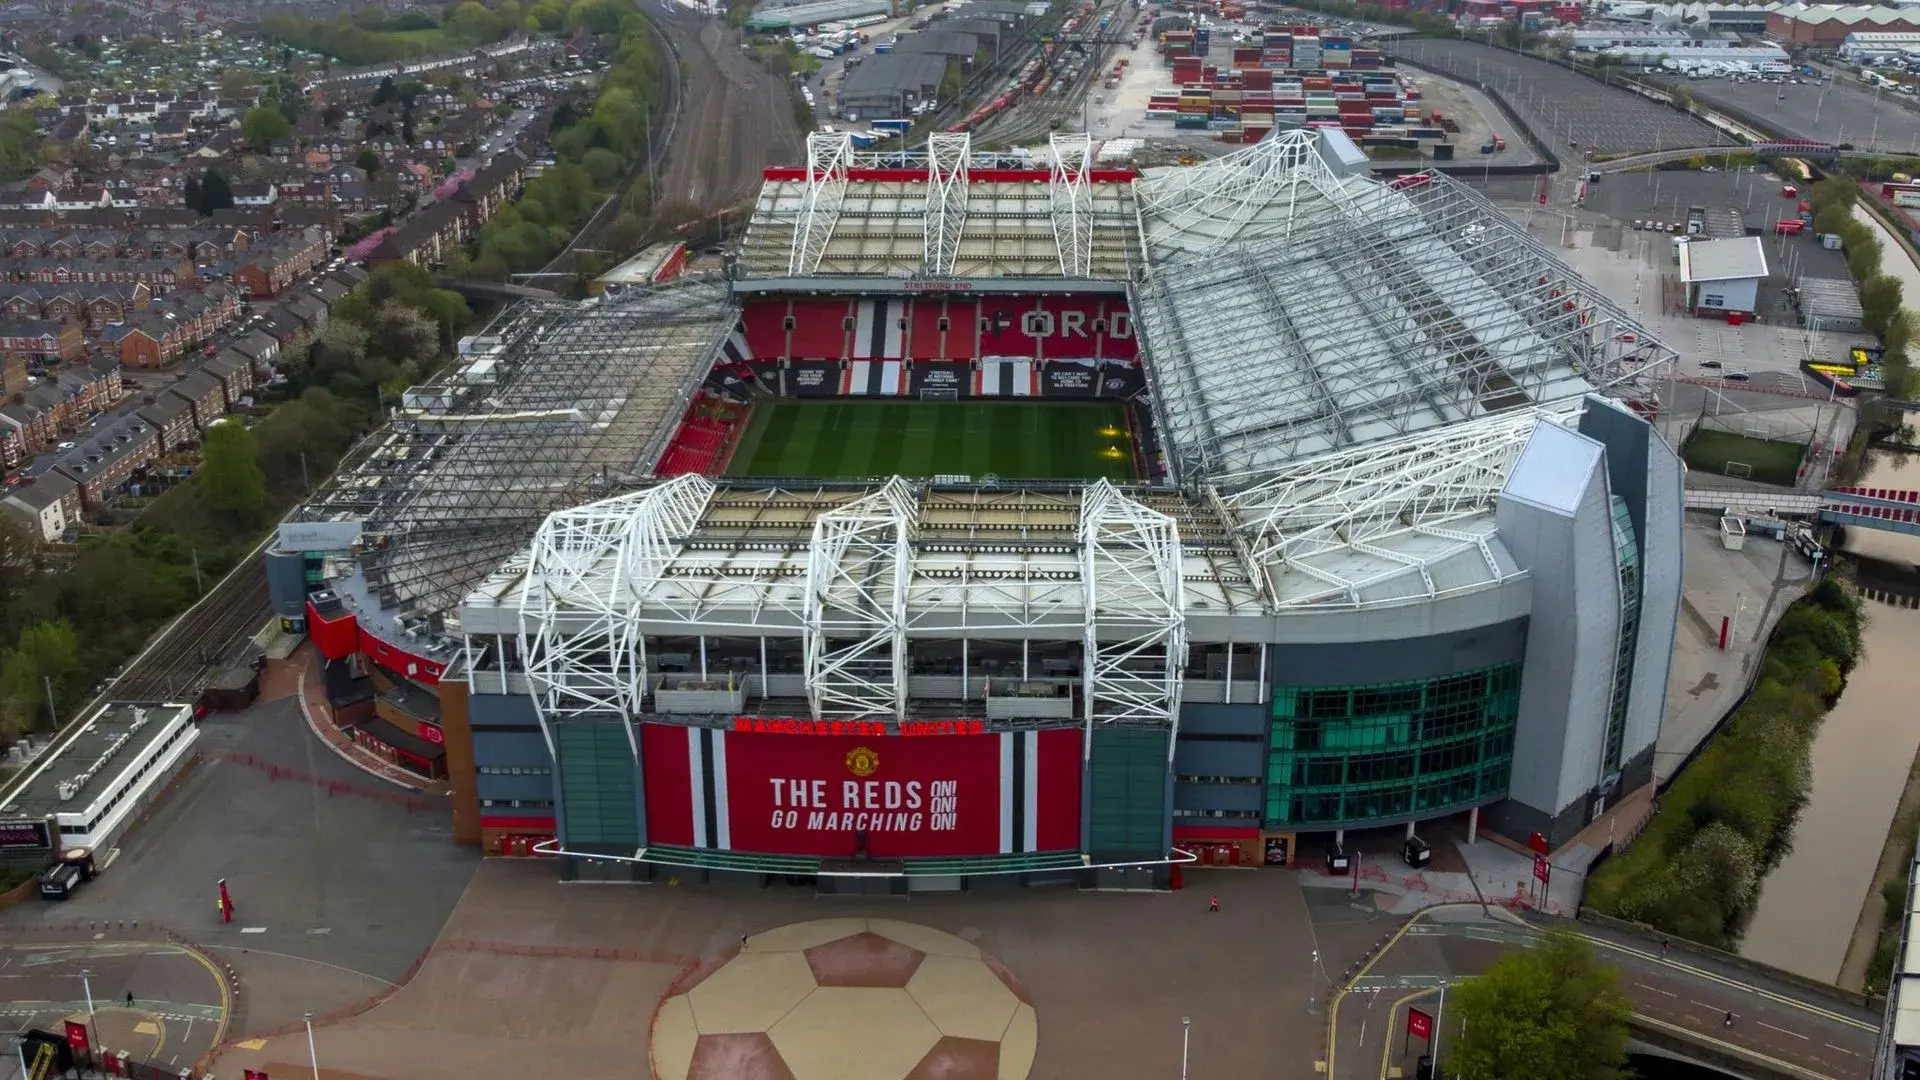 Top 10 Insanely biggest stadiums in England now: Old Trafford, Manchester United